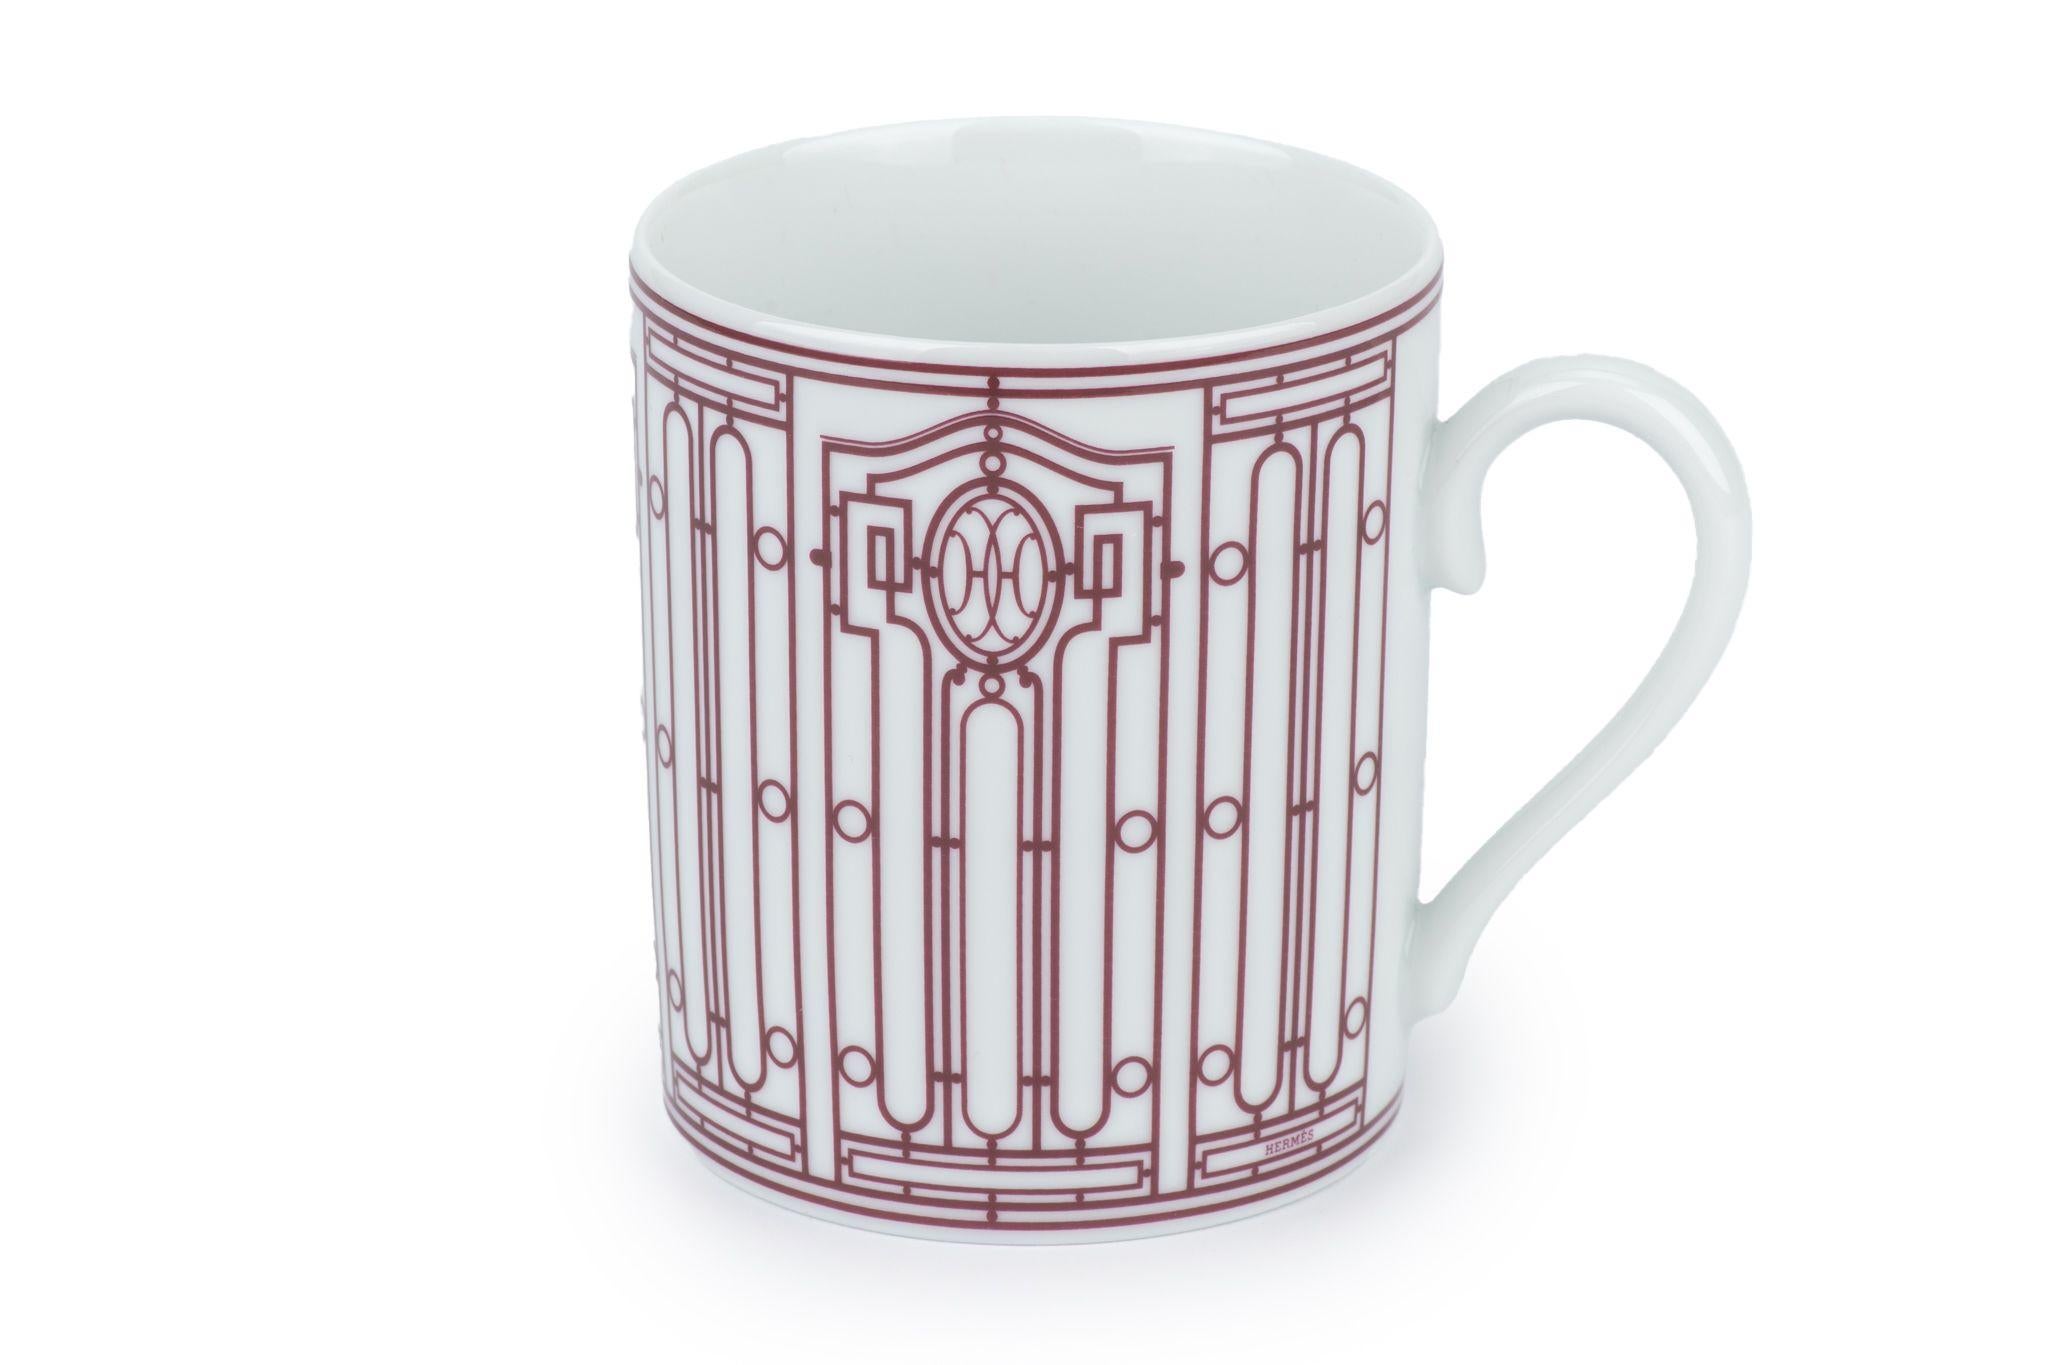 The Hermès H Art Deco Mug, features the Hermès 24 Faubourg and rue de Sèvres stores, inspired H Déco collection including the mug. The service is stamped with the initials HH, around which an intricate black and white decoration spirals. 
New, comes